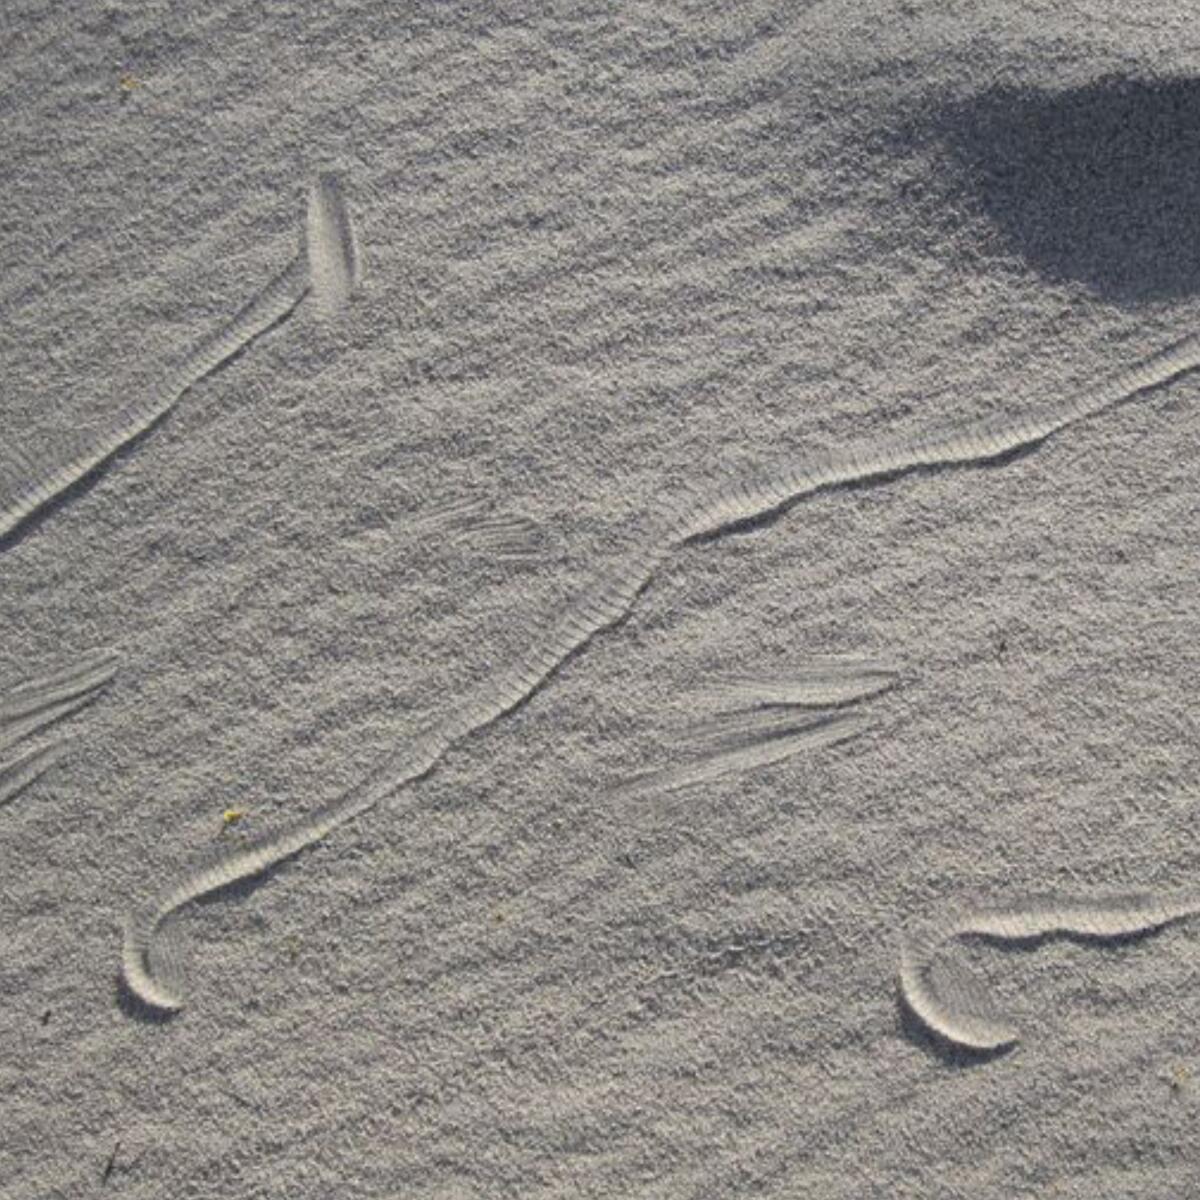 Trails in the sands of the Mojave Desert are from snakes